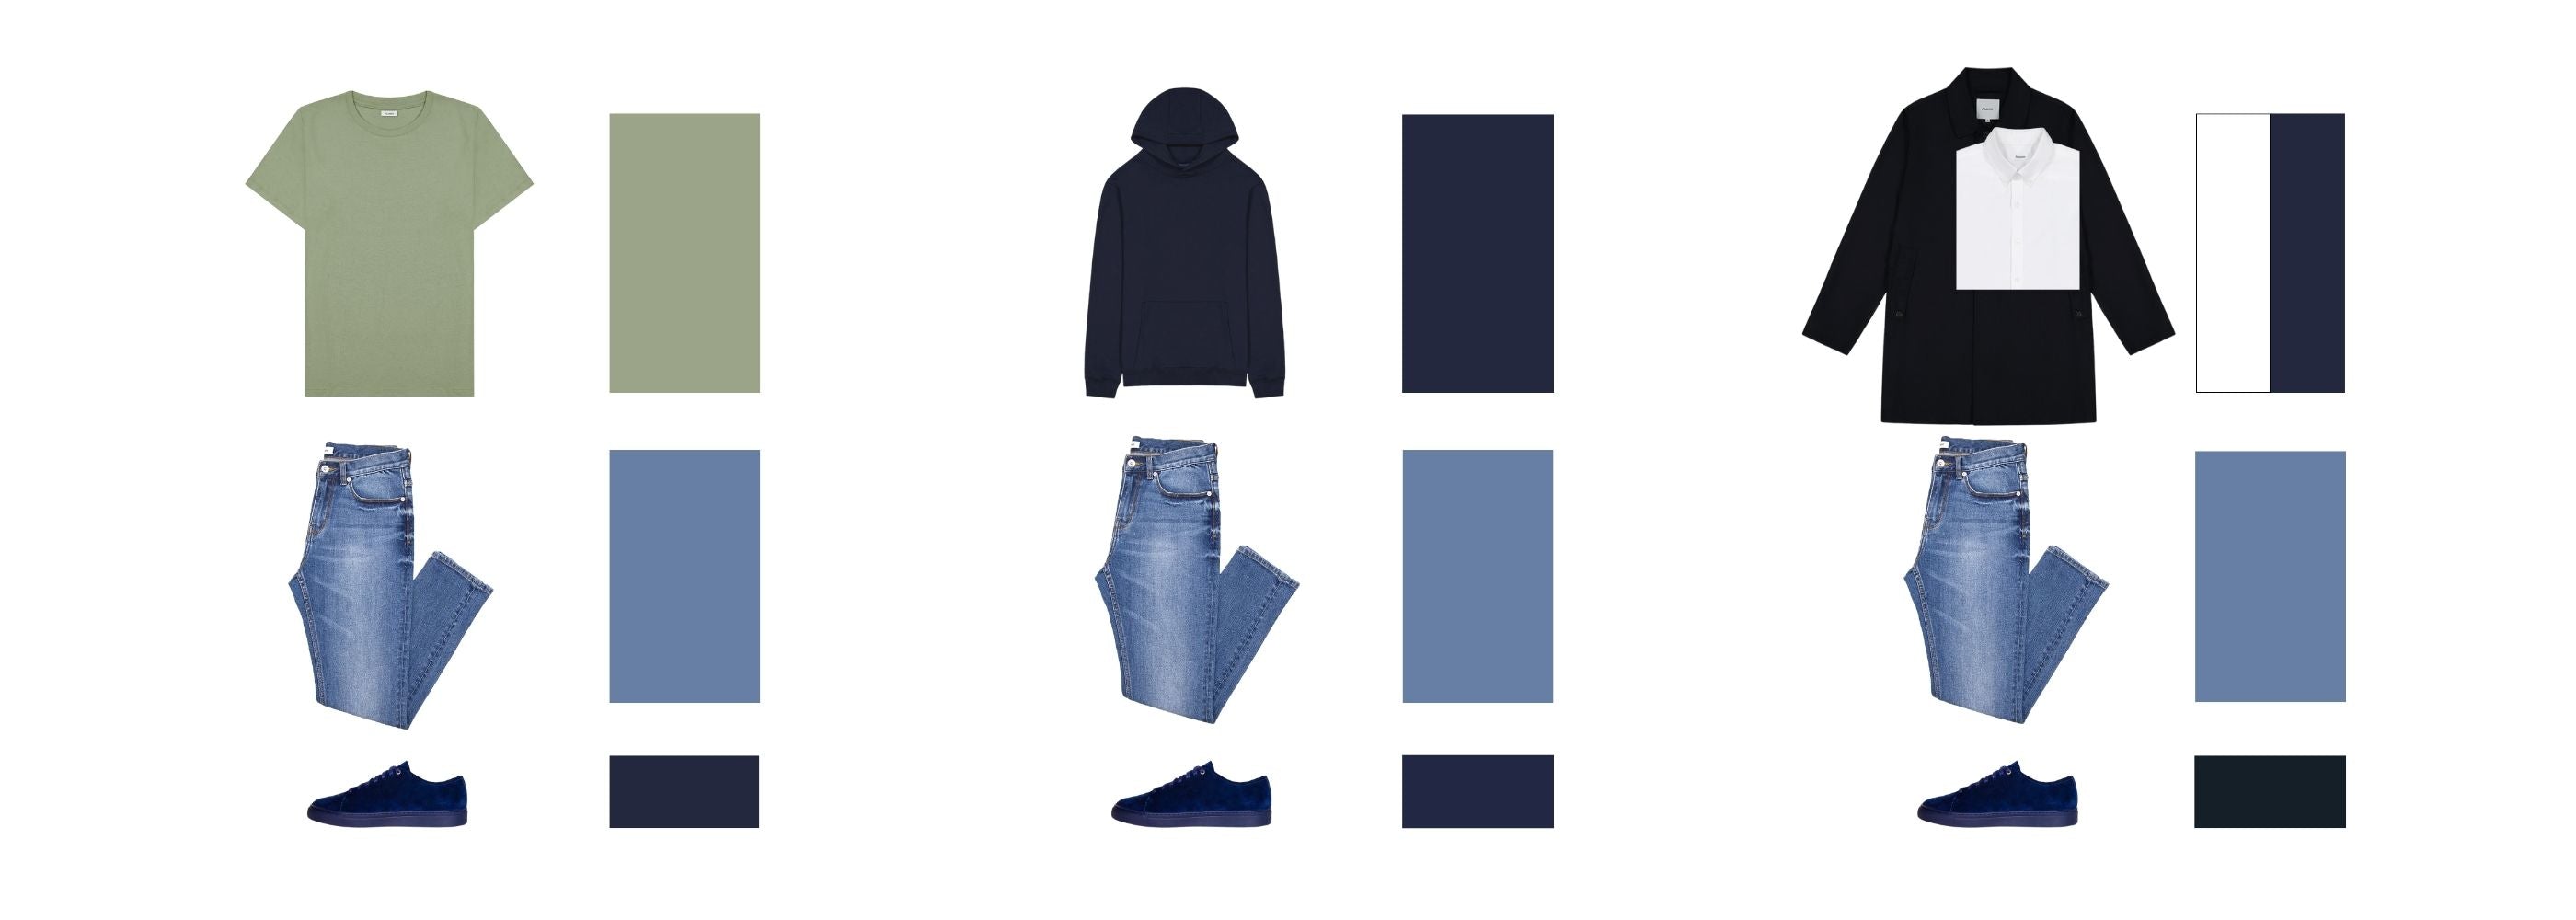 Foolproof Colour Combinations for Washed Blue Jeans with a Cream/Navy Sneaker